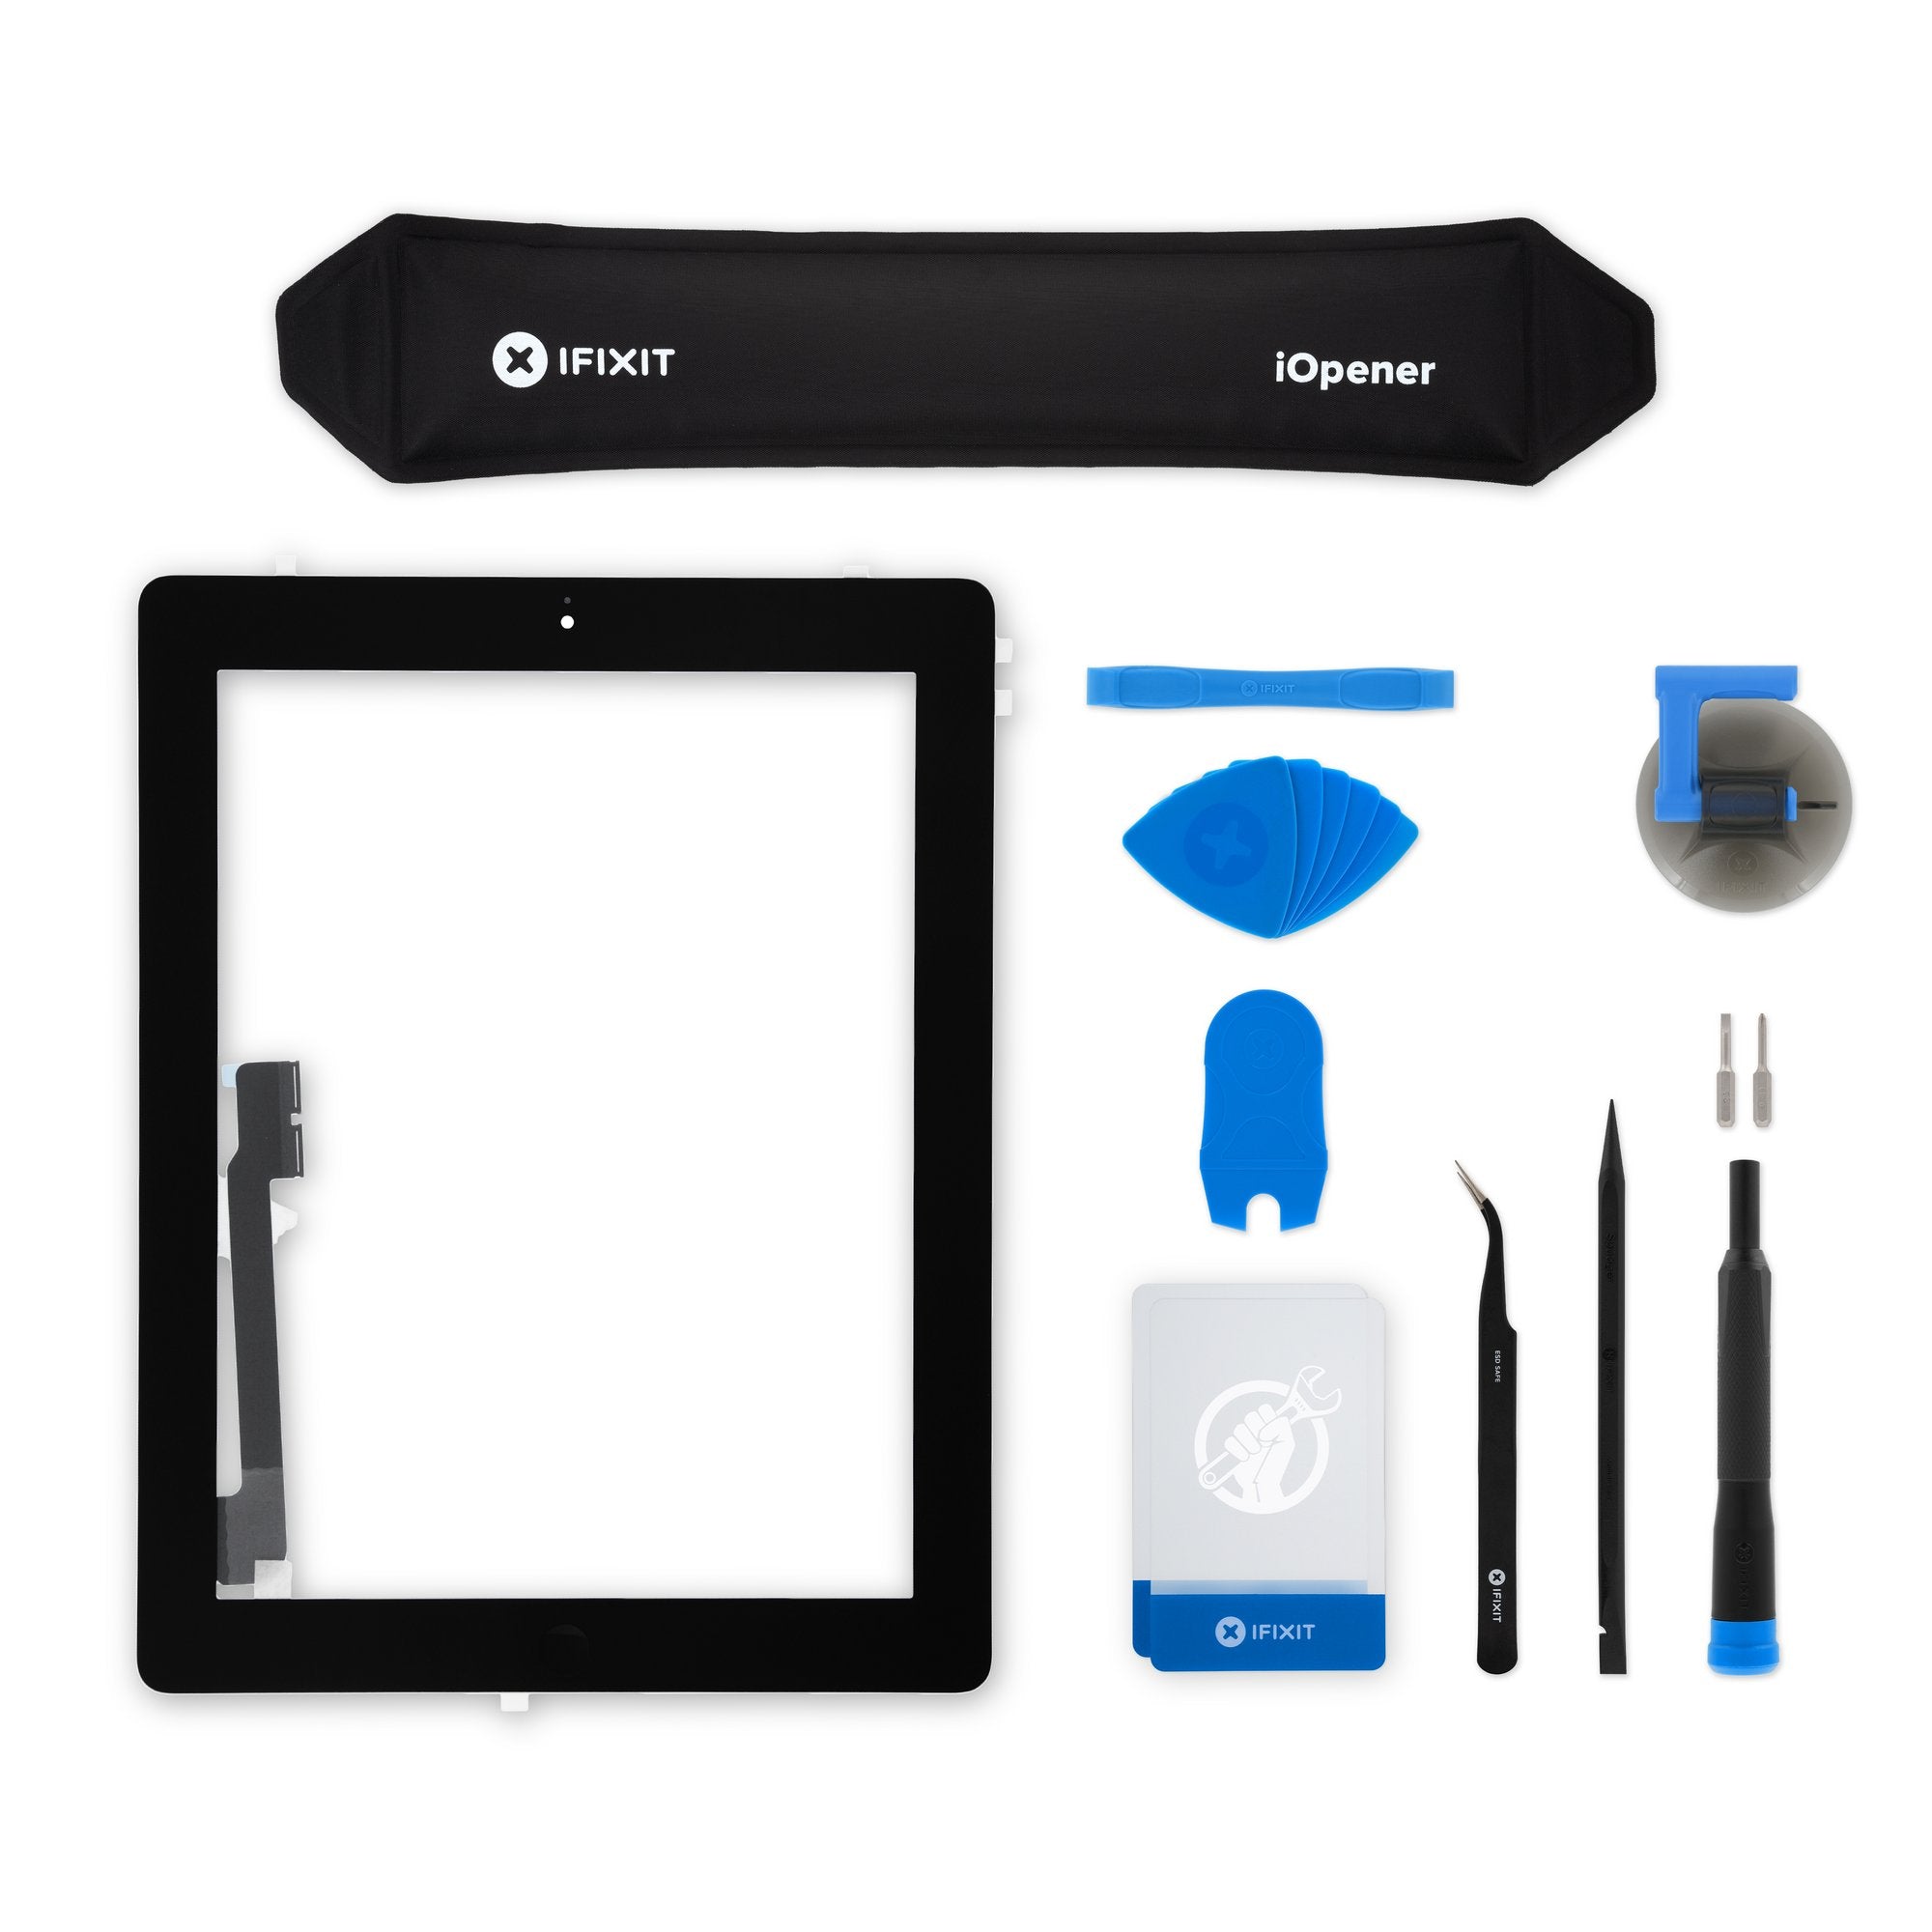 iPad 4 A1458 Screen: Digitizer Assembly Replacement Kit - iFixit